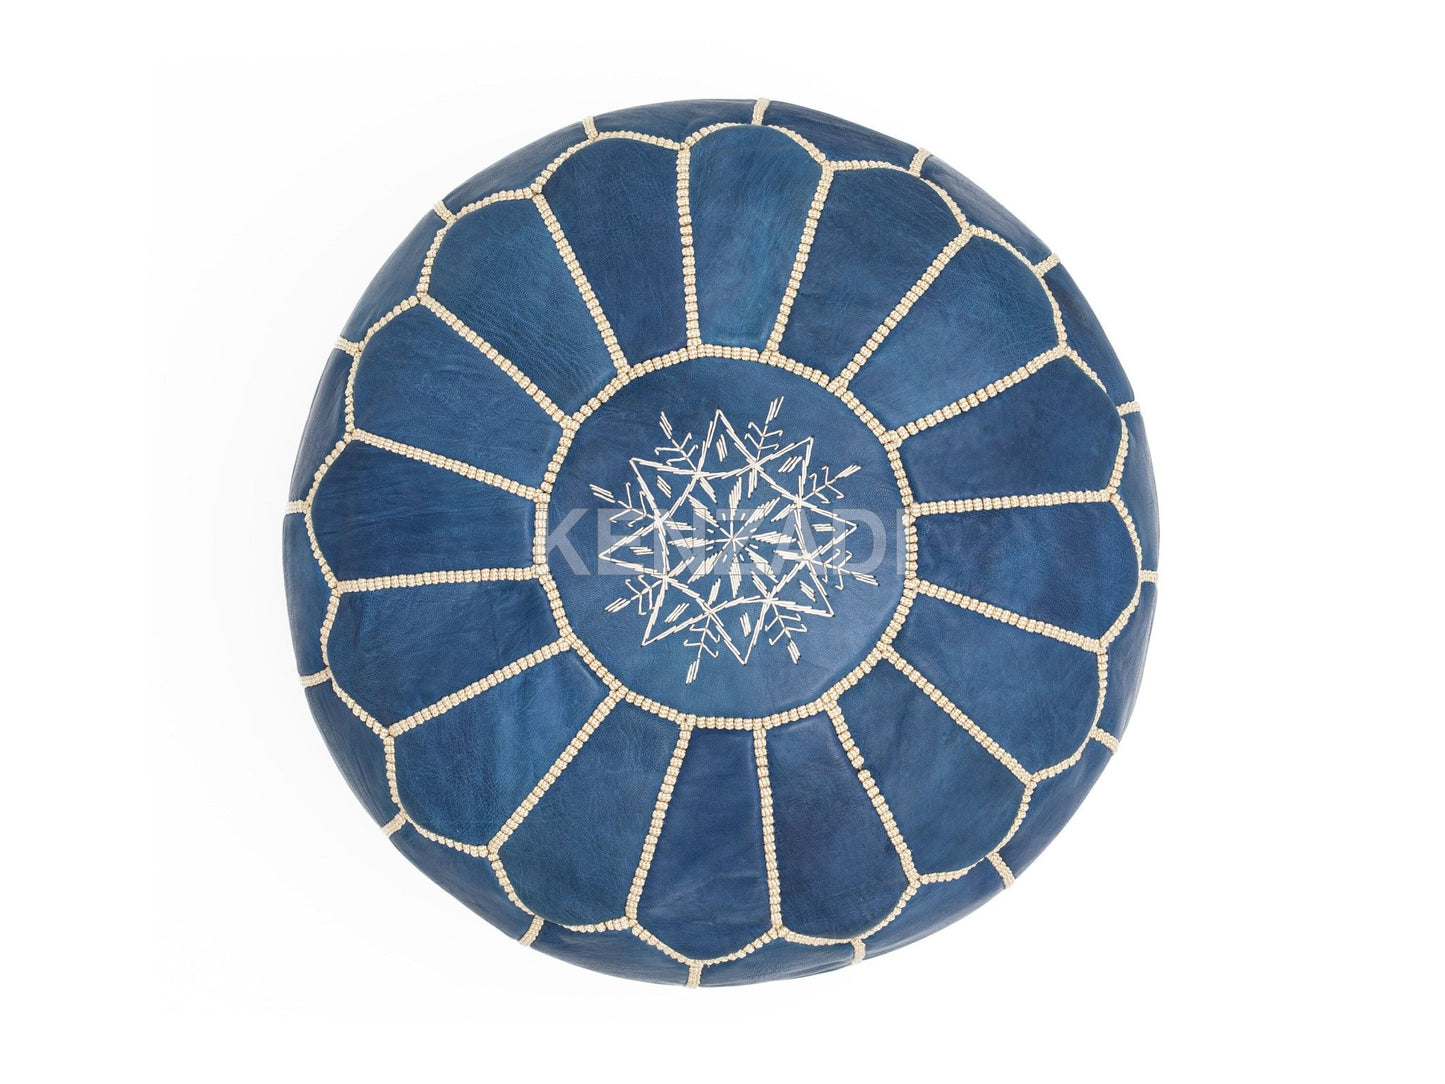 Authentic round Moroccan leather pouf in sewn TAN leather with blue and beige embroidery by Kenzadi